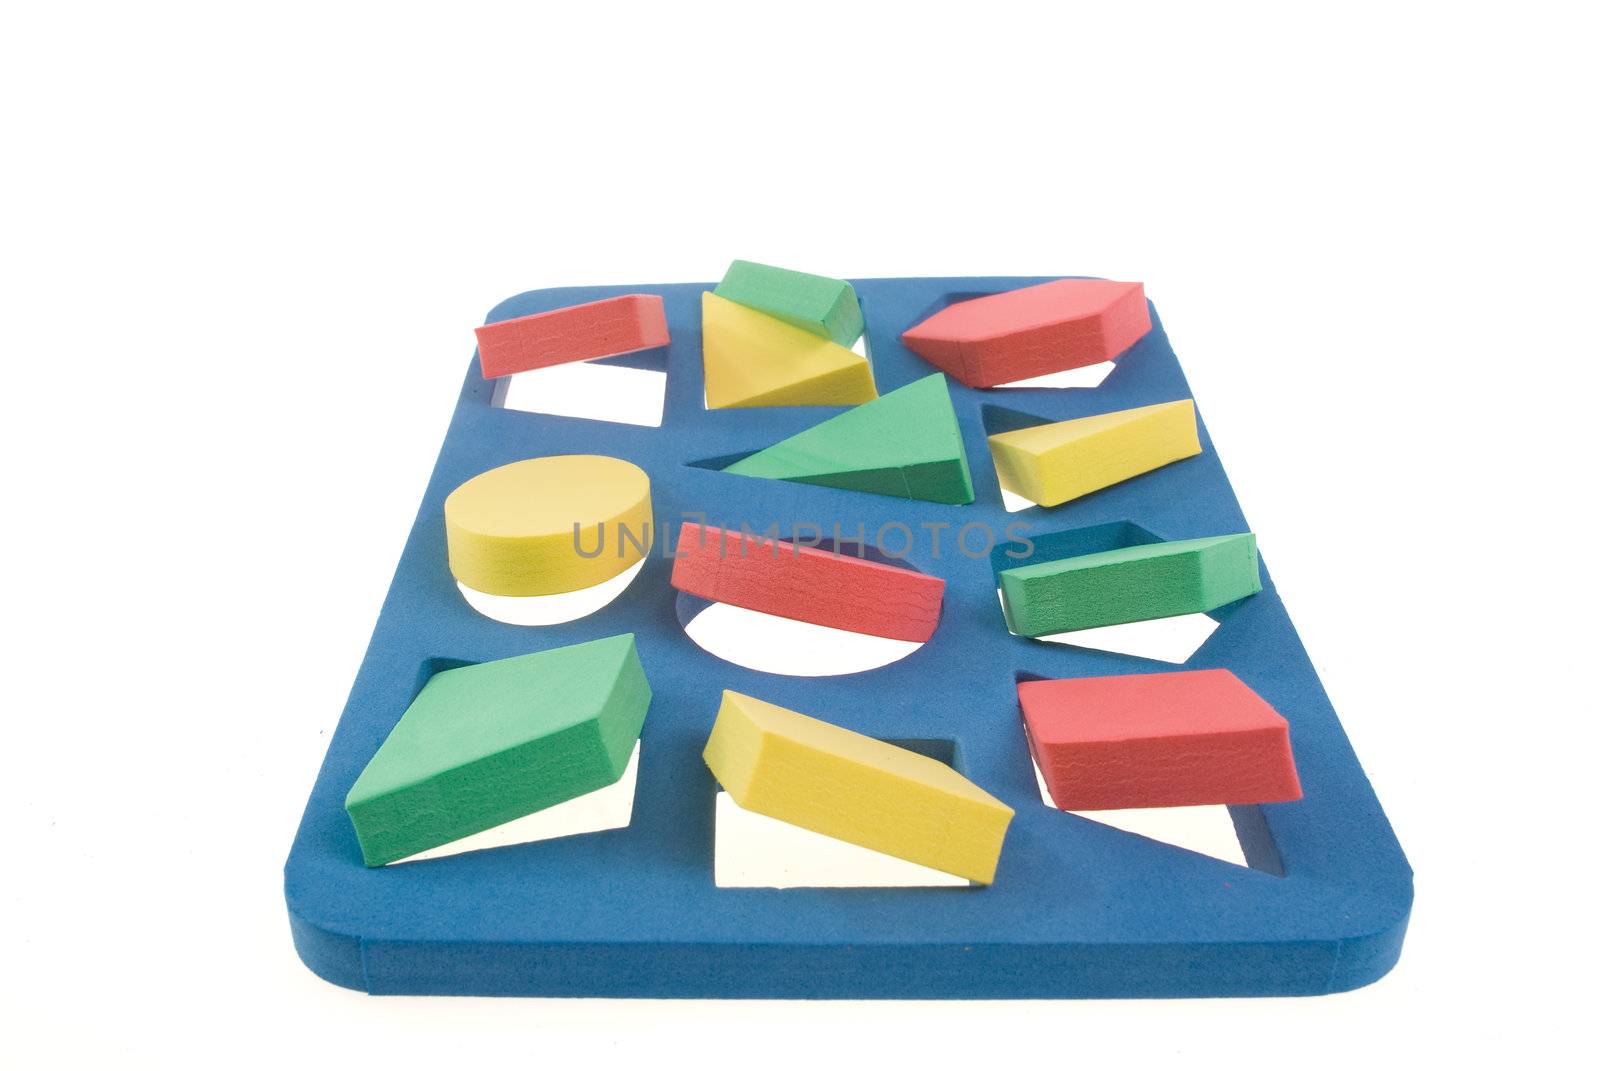 Developing game with geometric shapes for children